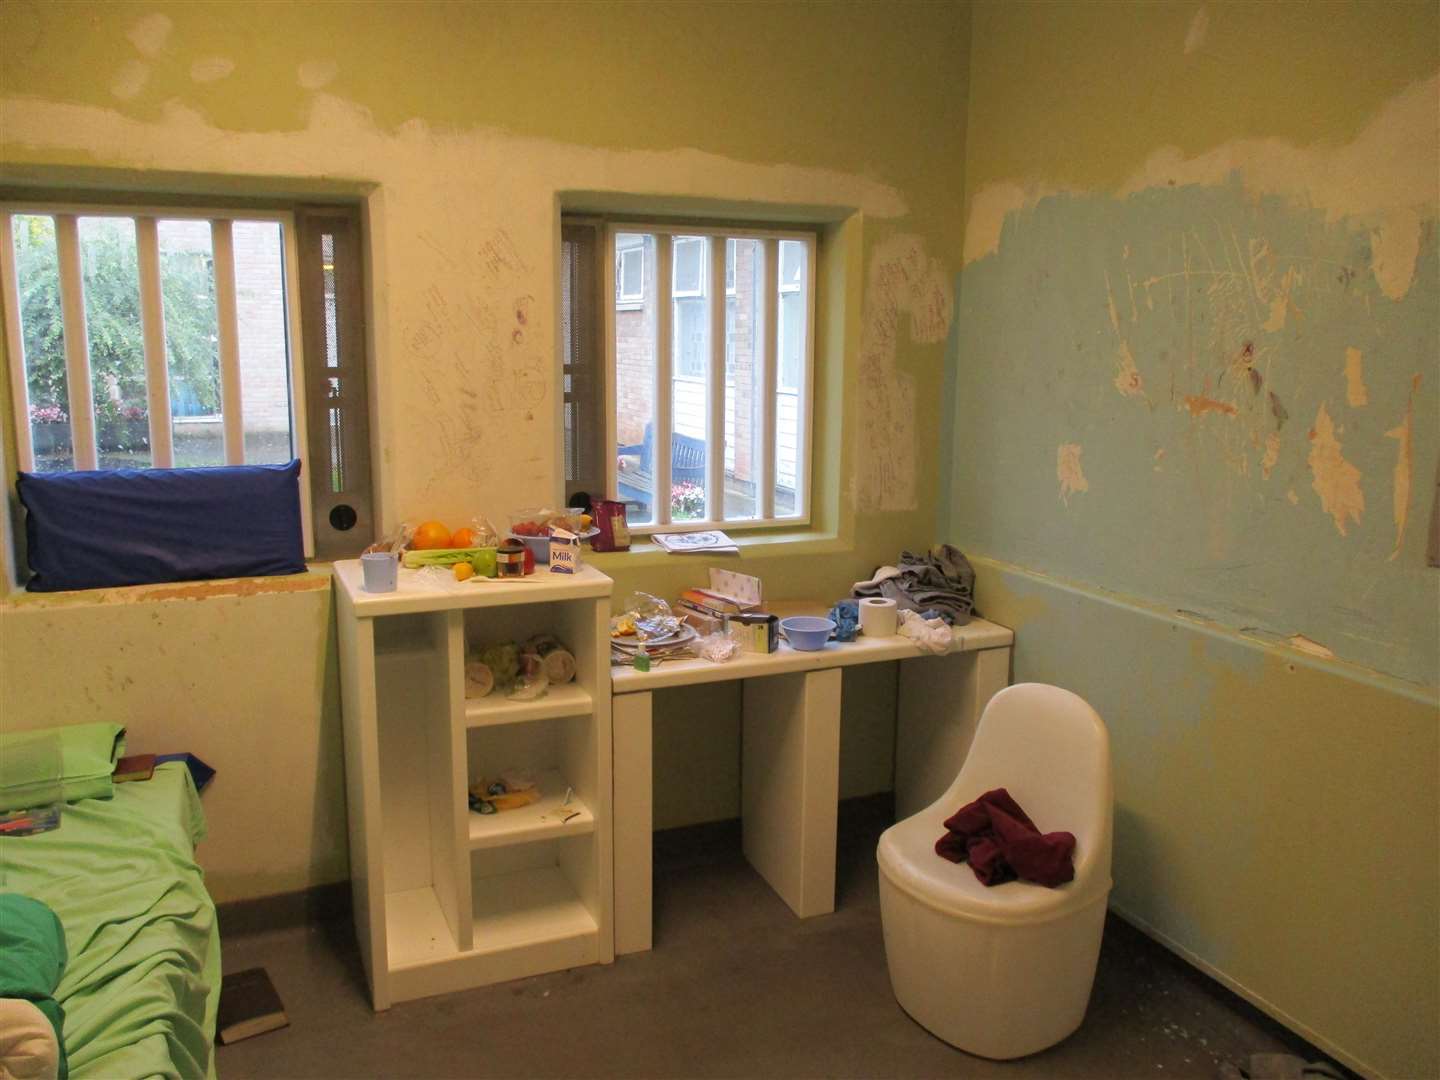 A prison cell in unit 4 of HMP Eastwood Park